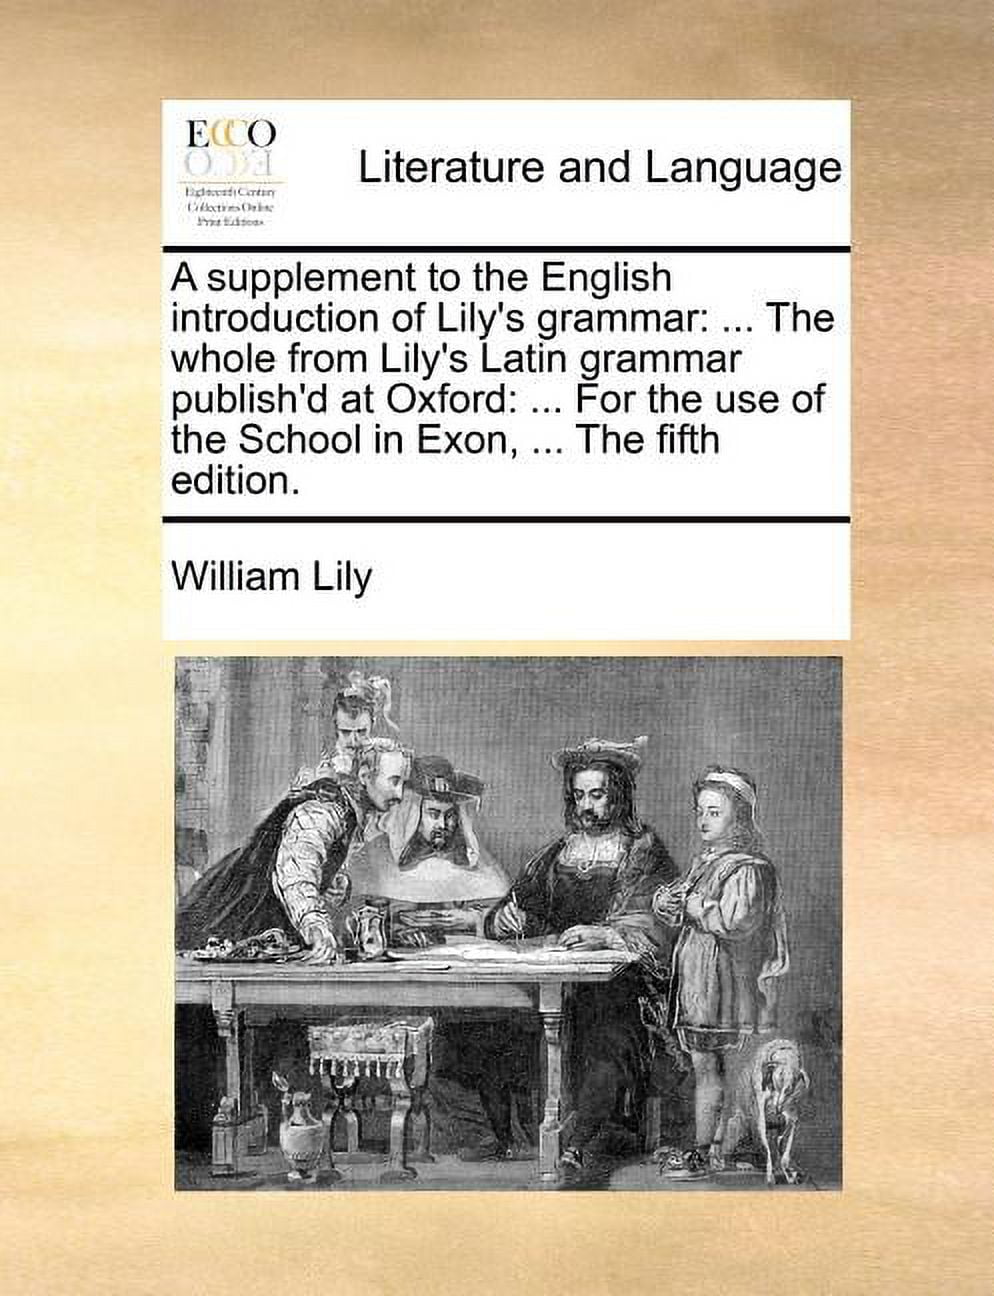 Whole　the　of　School　Oxford:　from　A　Latin　Grammar　...　to　at　Use　the　...　English　the　Publish'd　in　Exon,　the　Supplement　the　Lily's　of　for　Introduction　Lily's　...　Grammar　Fifth